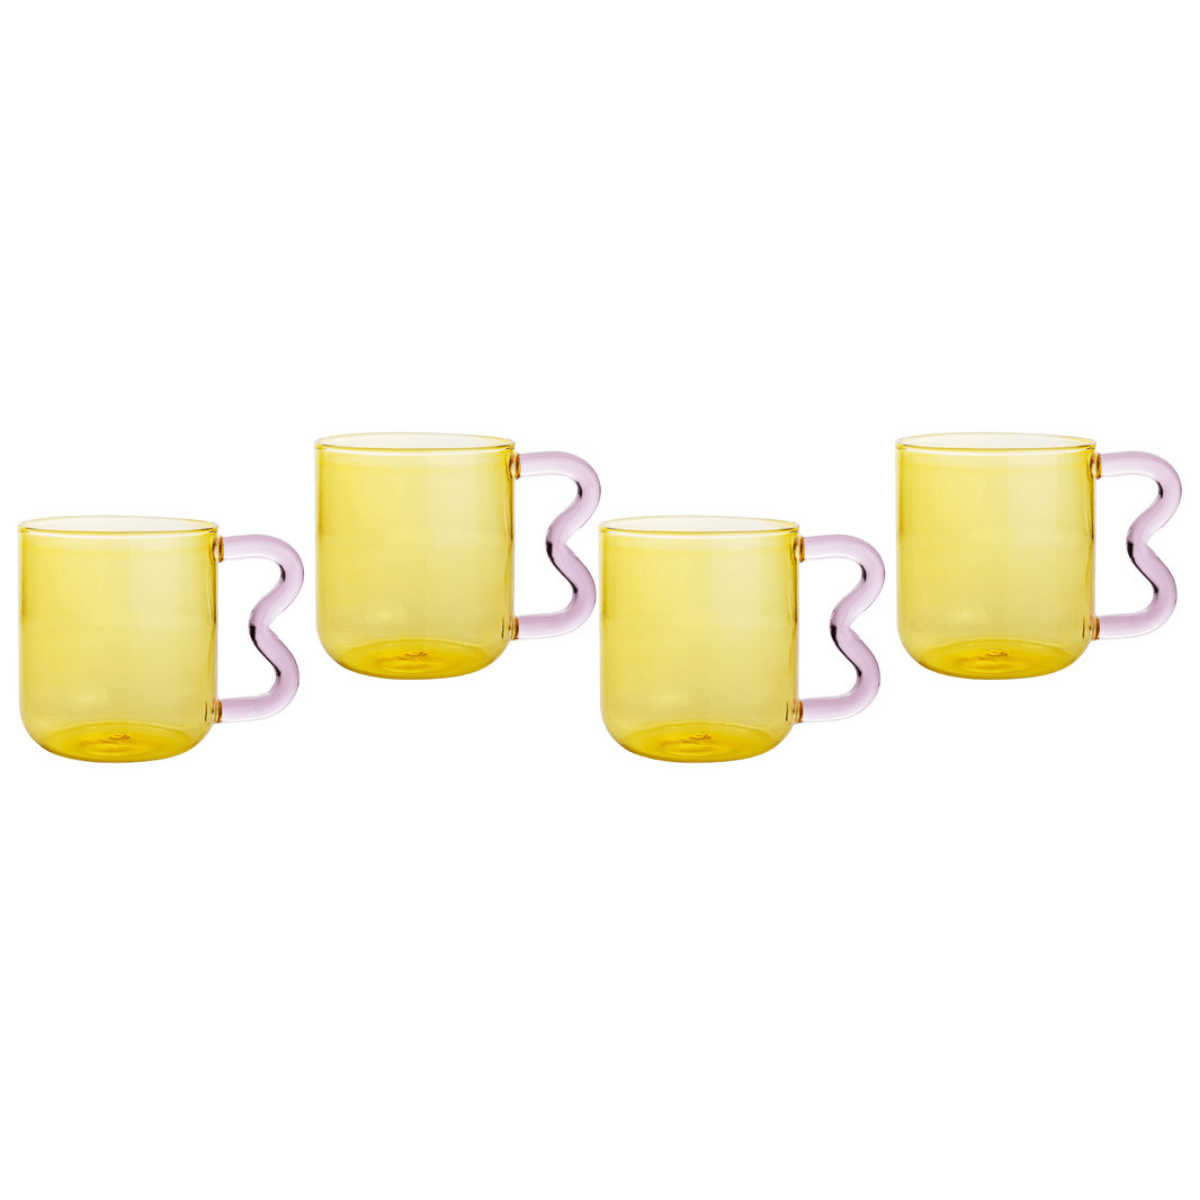 Lolita Amber and Pink Water Glass - Set of 4 Glassware TOV-T68870